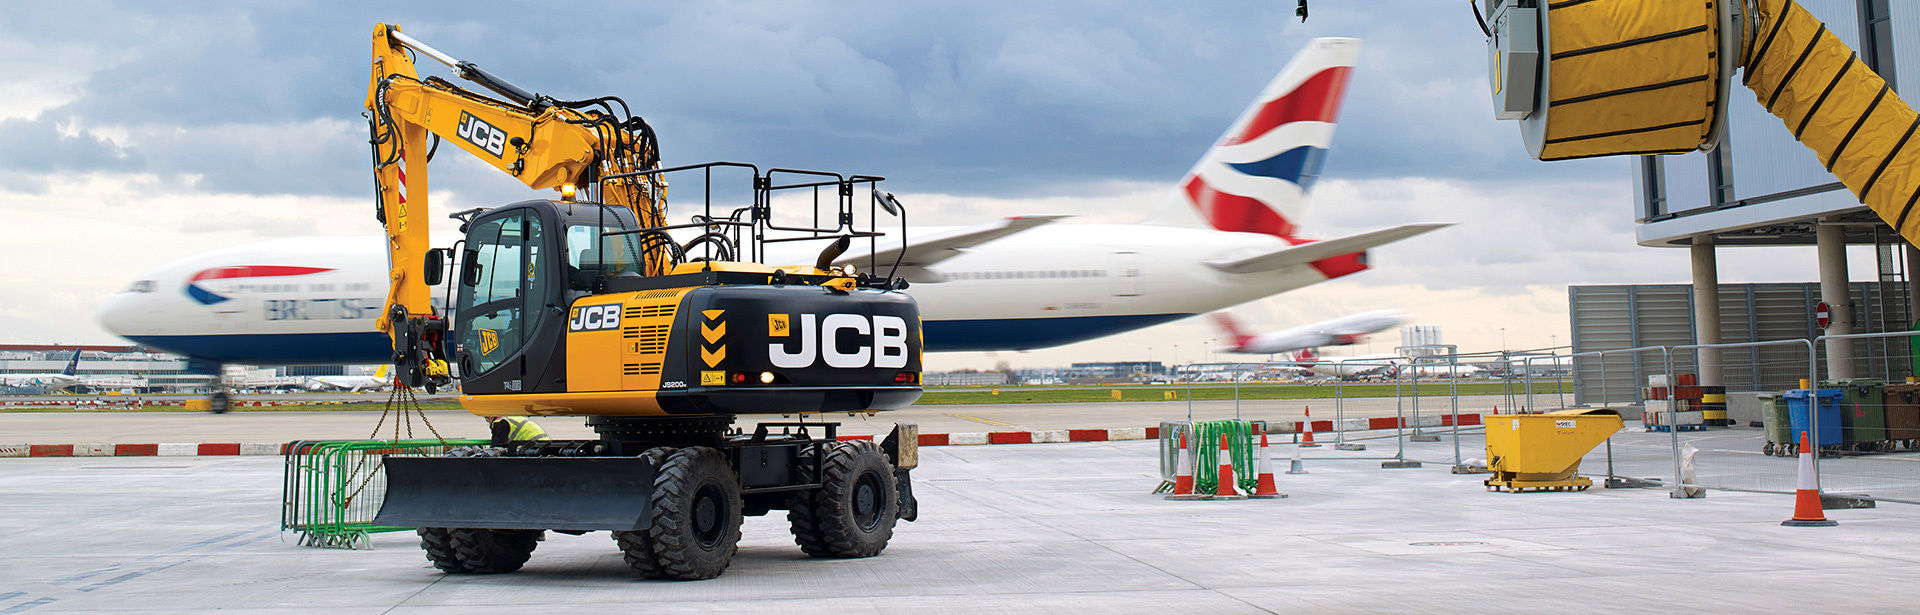 JCB wheeled excavator moving barriers at an airport